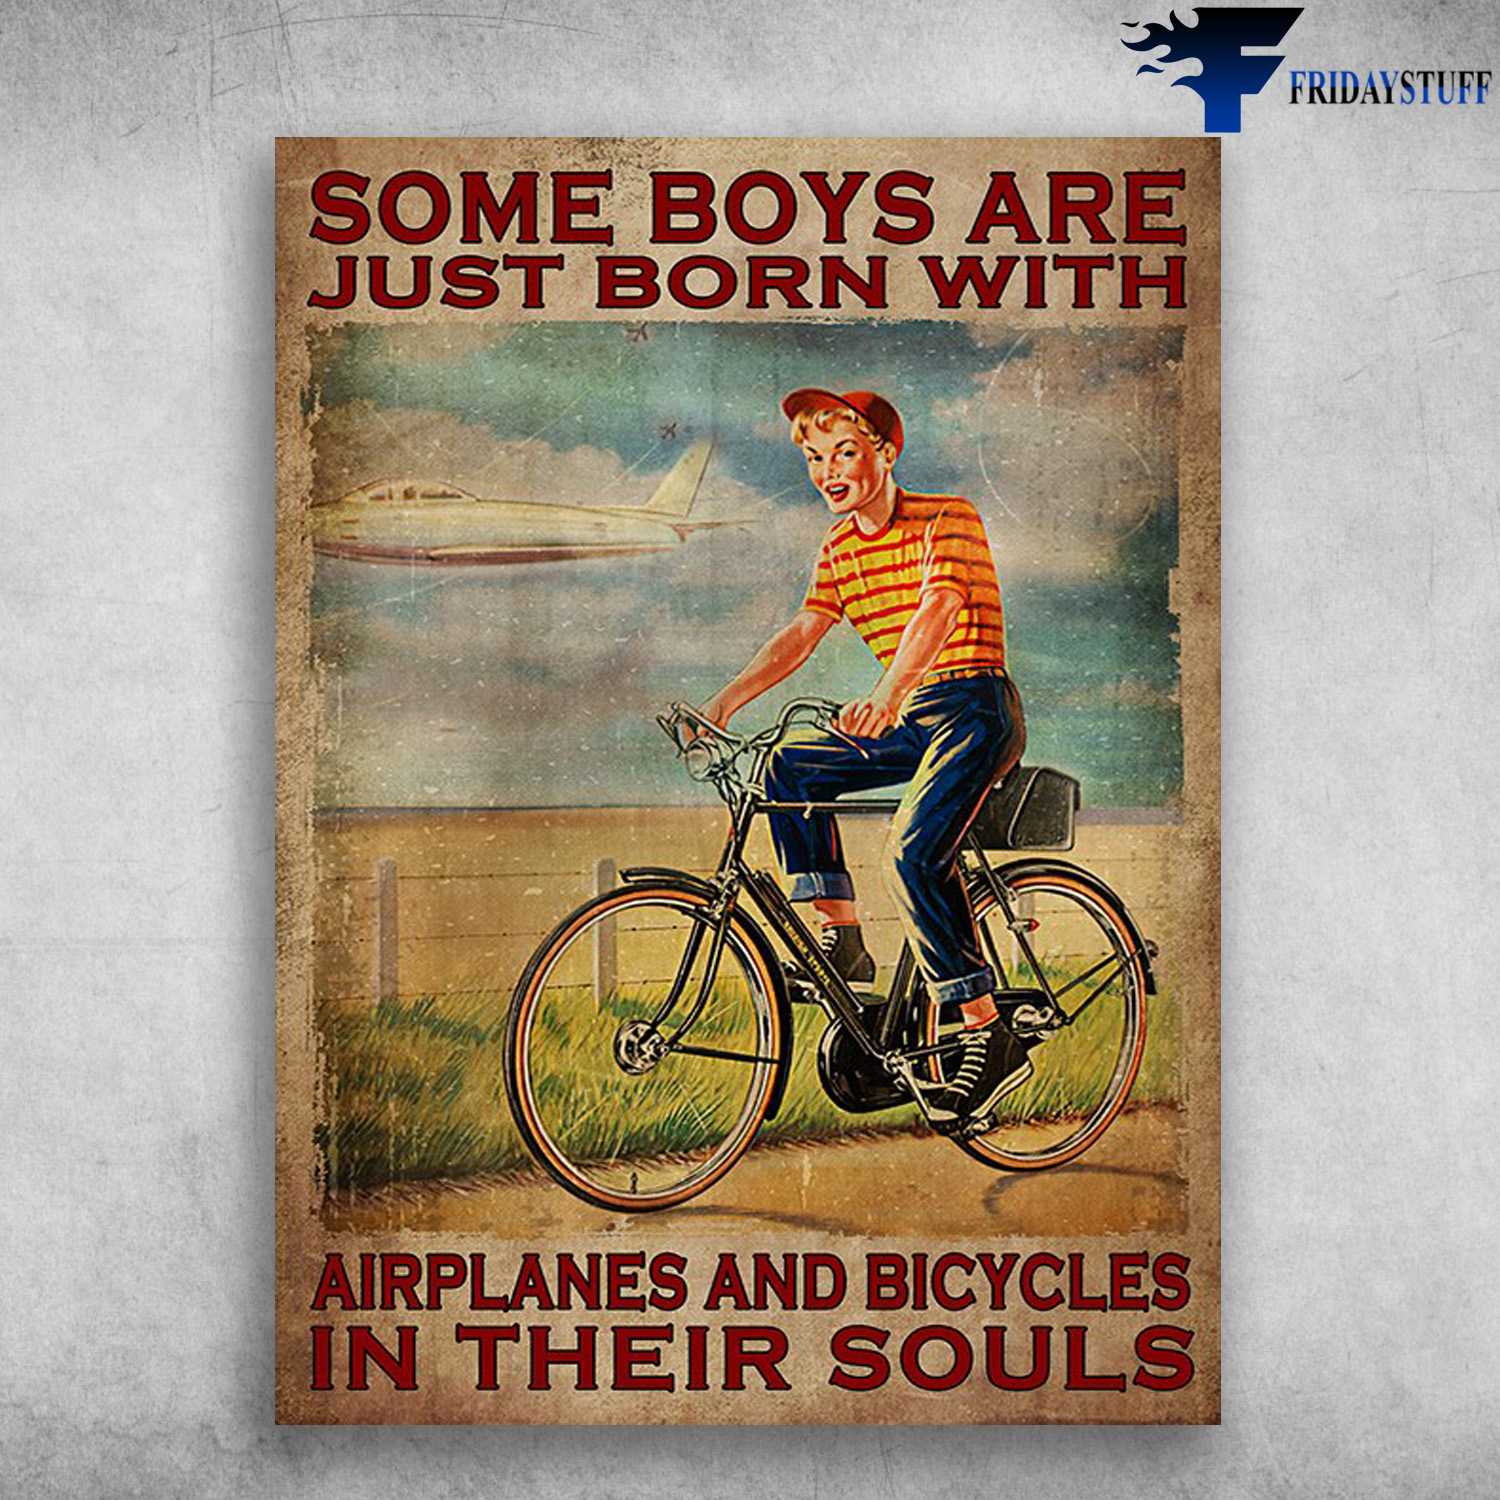 Bicycle Boy - Some Boys Are Just Born With, Airplanes And Bicycles, In Their Souls